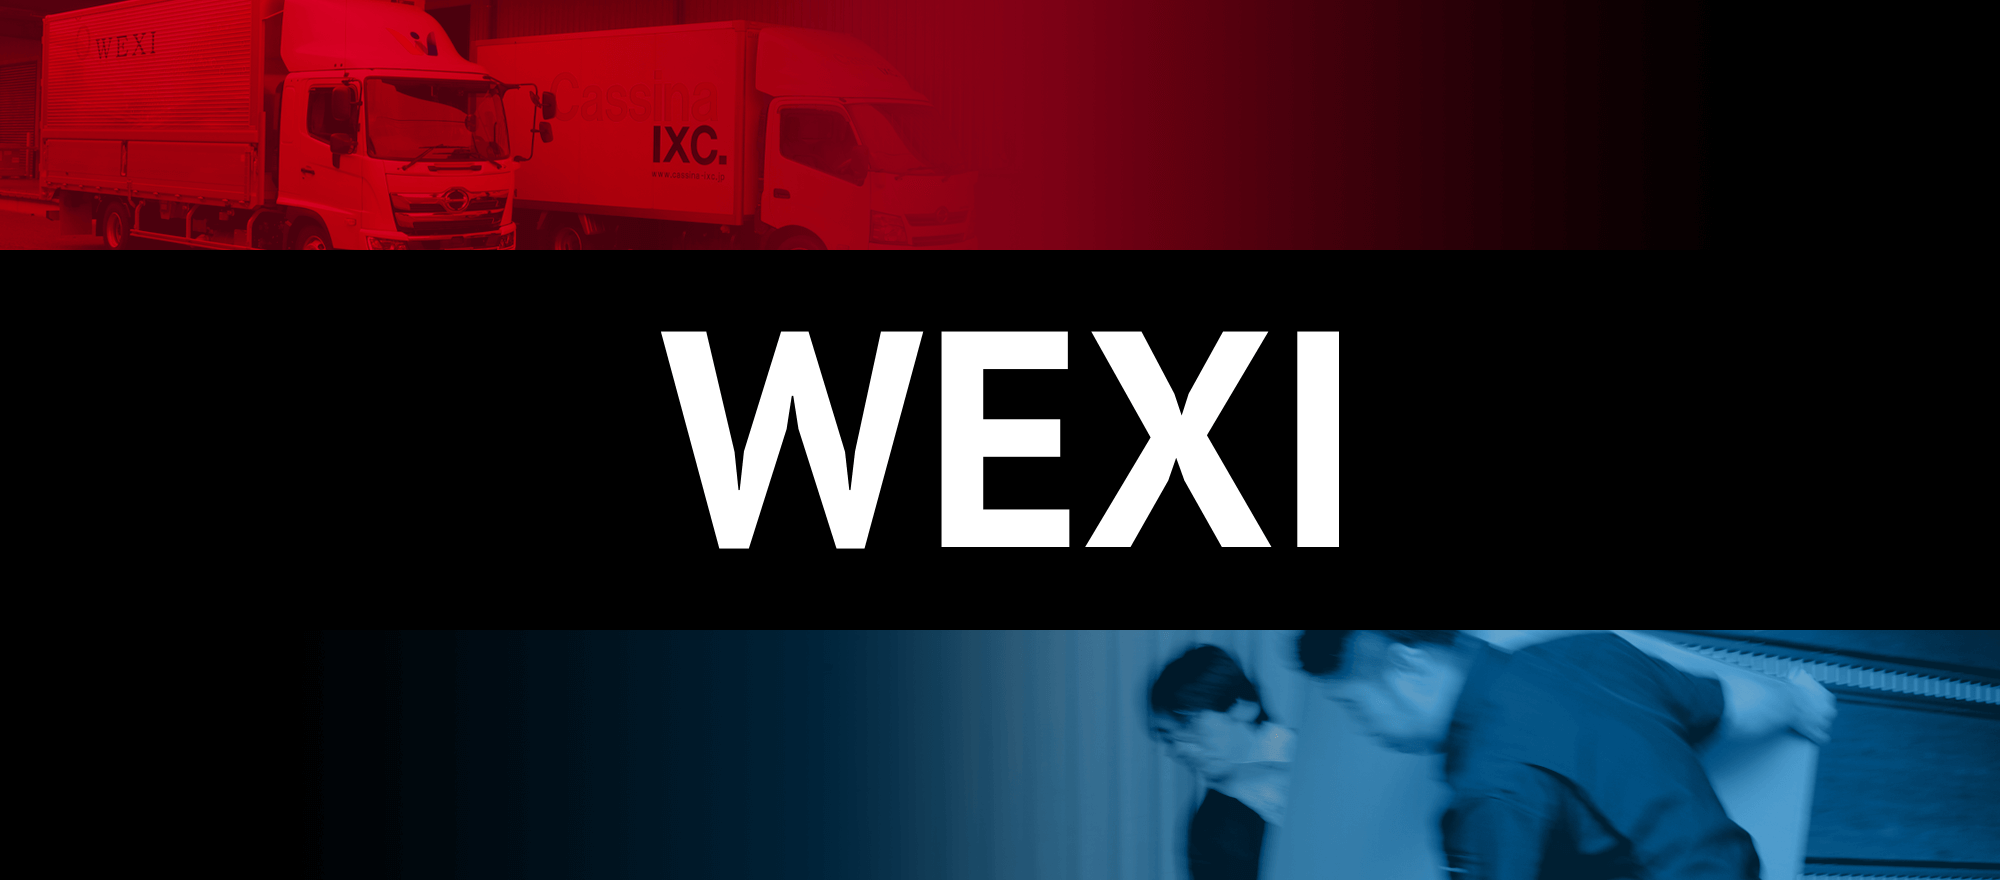 WEXI